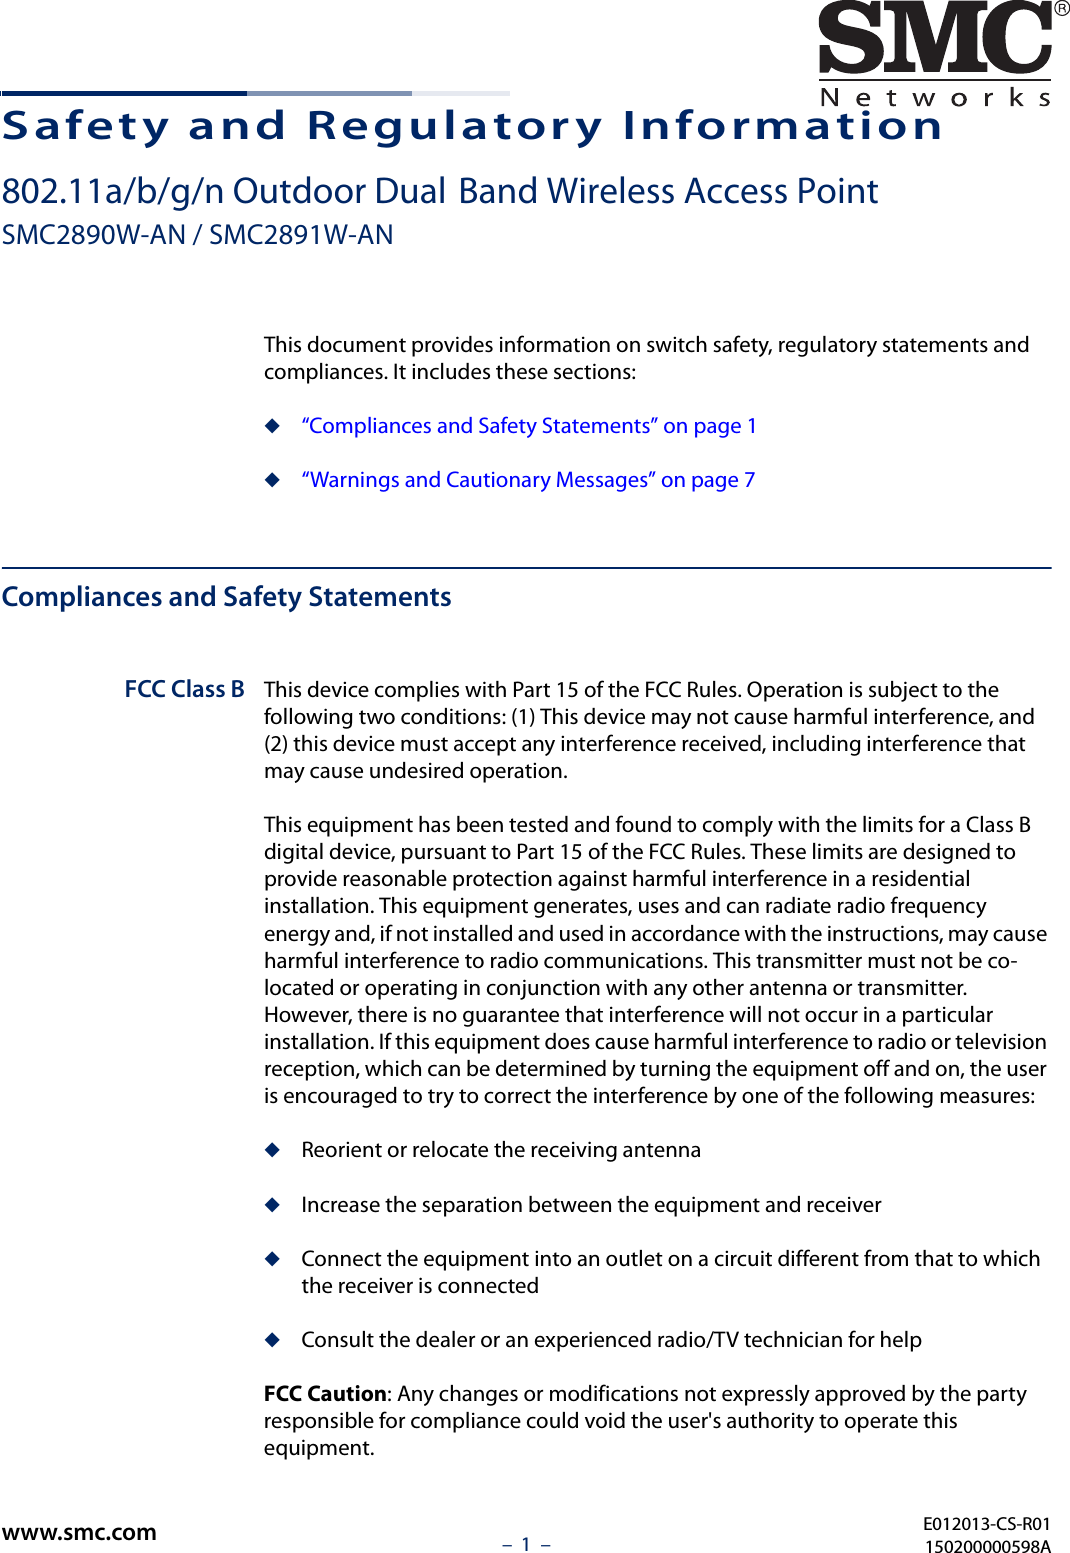 –  1  –Safety and Regulatory Information802.11a/b/g/n Outdoor Dual-Band Wireless Access PointSMC2890W-AN / SMC2891W-ANThis document provides information on switch safety, regulatory statements and compliances. It includes these sections:◆“Compliances and Safety Statements” on page 1◆“Warnings and Cautionary Messages” on page 7Compliances and Safety StatementsFCC Class B This device complies with Part 15 of the FCC Rules. Operation is subject to the following two conditions: (1) This device may not cause harmful interference, and (2) this device must accept any interference received, including interference that may cause undesired operation.This equipment has been tested and found to comply with the limits for a Class B digital device, pursuant to Part 15 of the FCC Rules. These limits are designed to provide reasonable protection against harmful interference in a residential installation. This equipment generates, uses and can radiate radio frequency energy and, if not installed and used in accordance with the instructions, may cause harmful interference to radio communications. This transmitter must not be co-located or operating in conjunction with any other antenna or transmitter. However, there is no guarantee that interference will not occur in a particular installation. If this equipment does cause harmful interference to radio or television reception, which can be determined by turning the equipment off and on, the user is encouraged to try to correct the interference by one of the following measures:◆Reorient or relocate the receiving antenna◆Increase the separation between the equipment and receiver◆Connect the equipment into an outlet on a circuit different from that to which the receiver is connected◆Consult the dealer or an experienced radio/TV technician for helpFCC Caution: Any changes or modifications not expressly approved by the party responsible for compliance could void the user&apos;s authority to operate this equipment. E012013-CS-R01150200000598Awww.smc.com